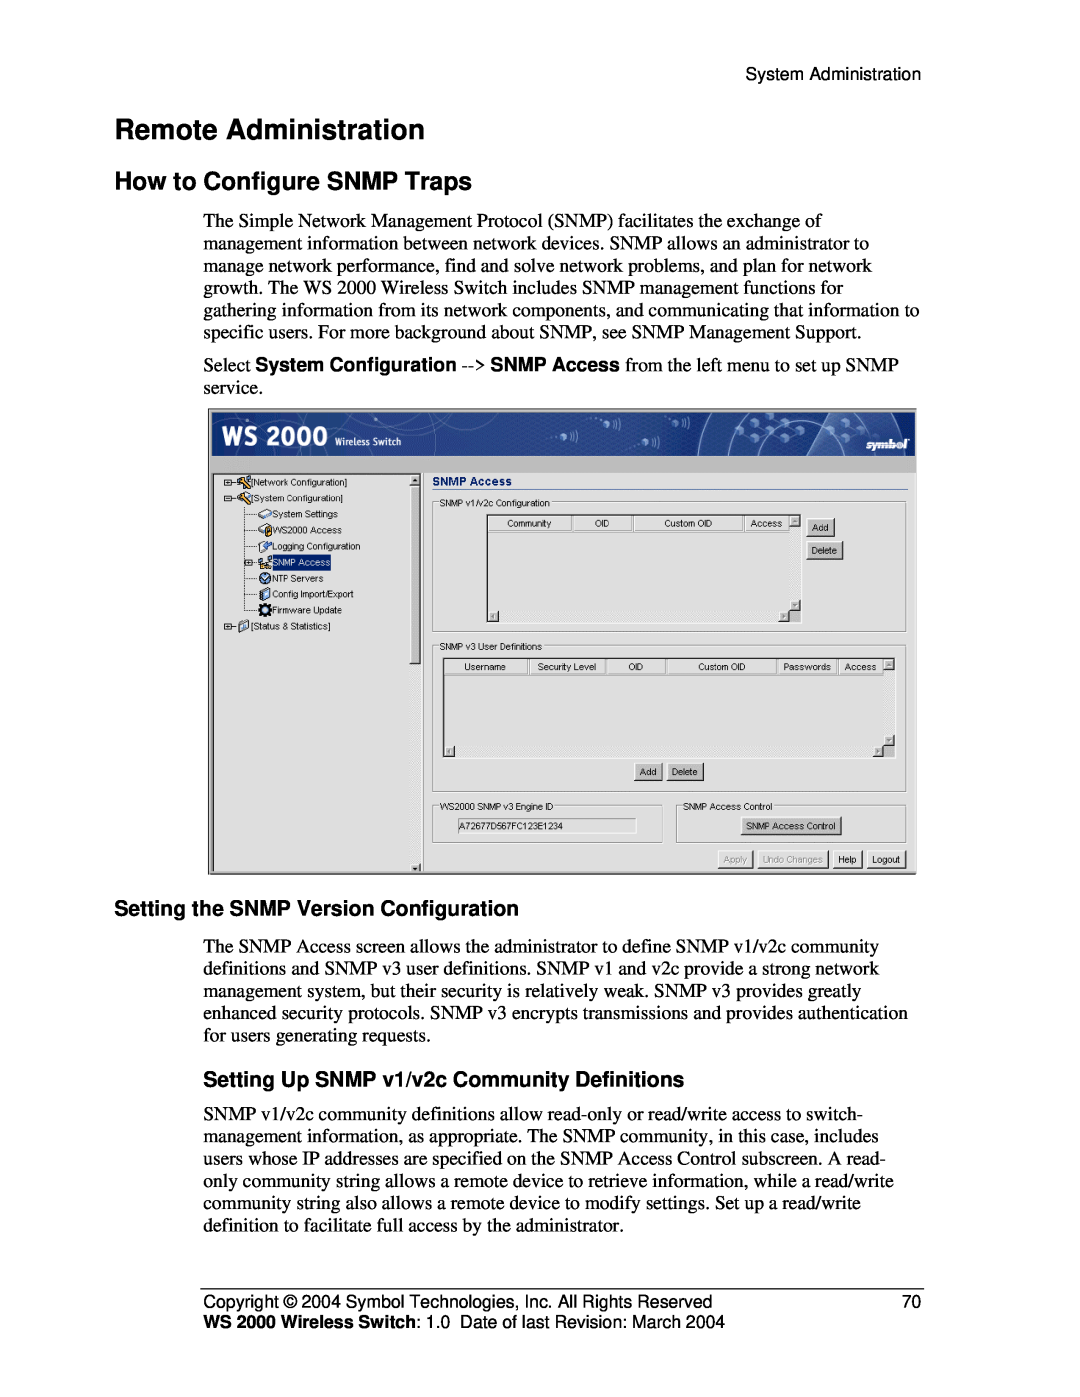 Symbol Technologies WS 2000 Remote Administration, How to Configure SNMP Traps, Setting the SNMP Version Configuration 